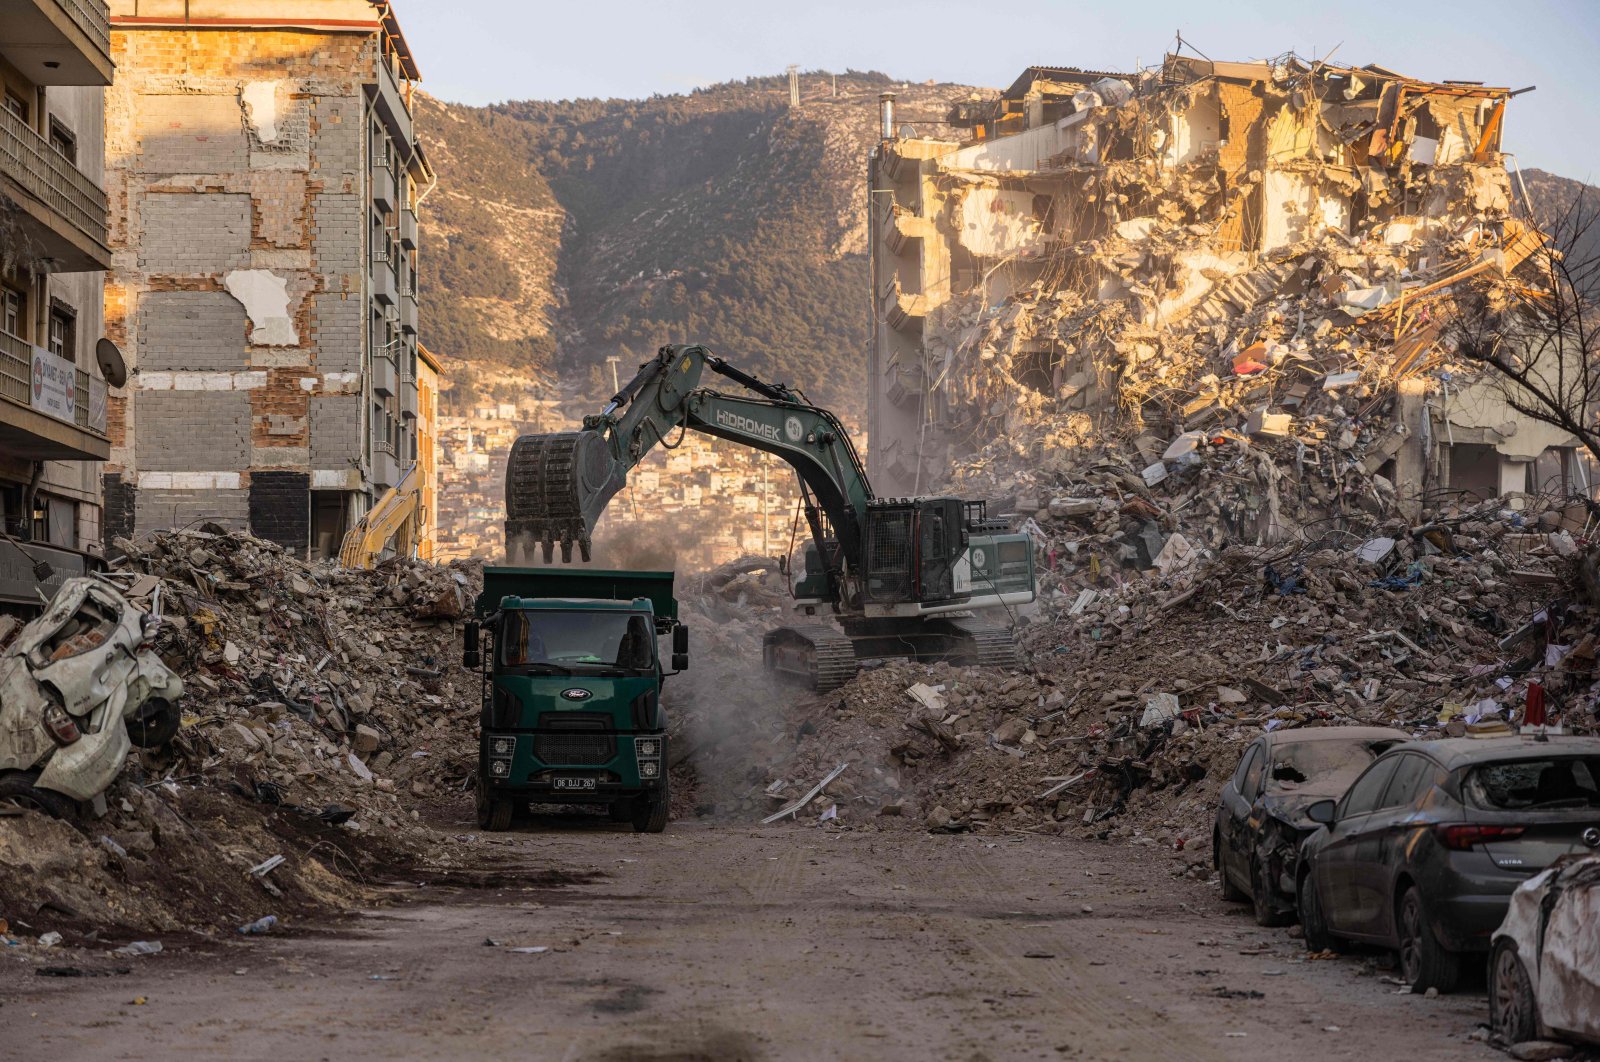 A digger removes the rubble of collapsed buildings following the deadly earthquakes in Antakya, Hatay province, southern Türkiye, Feb. 20, 2023. (AFP Photo)